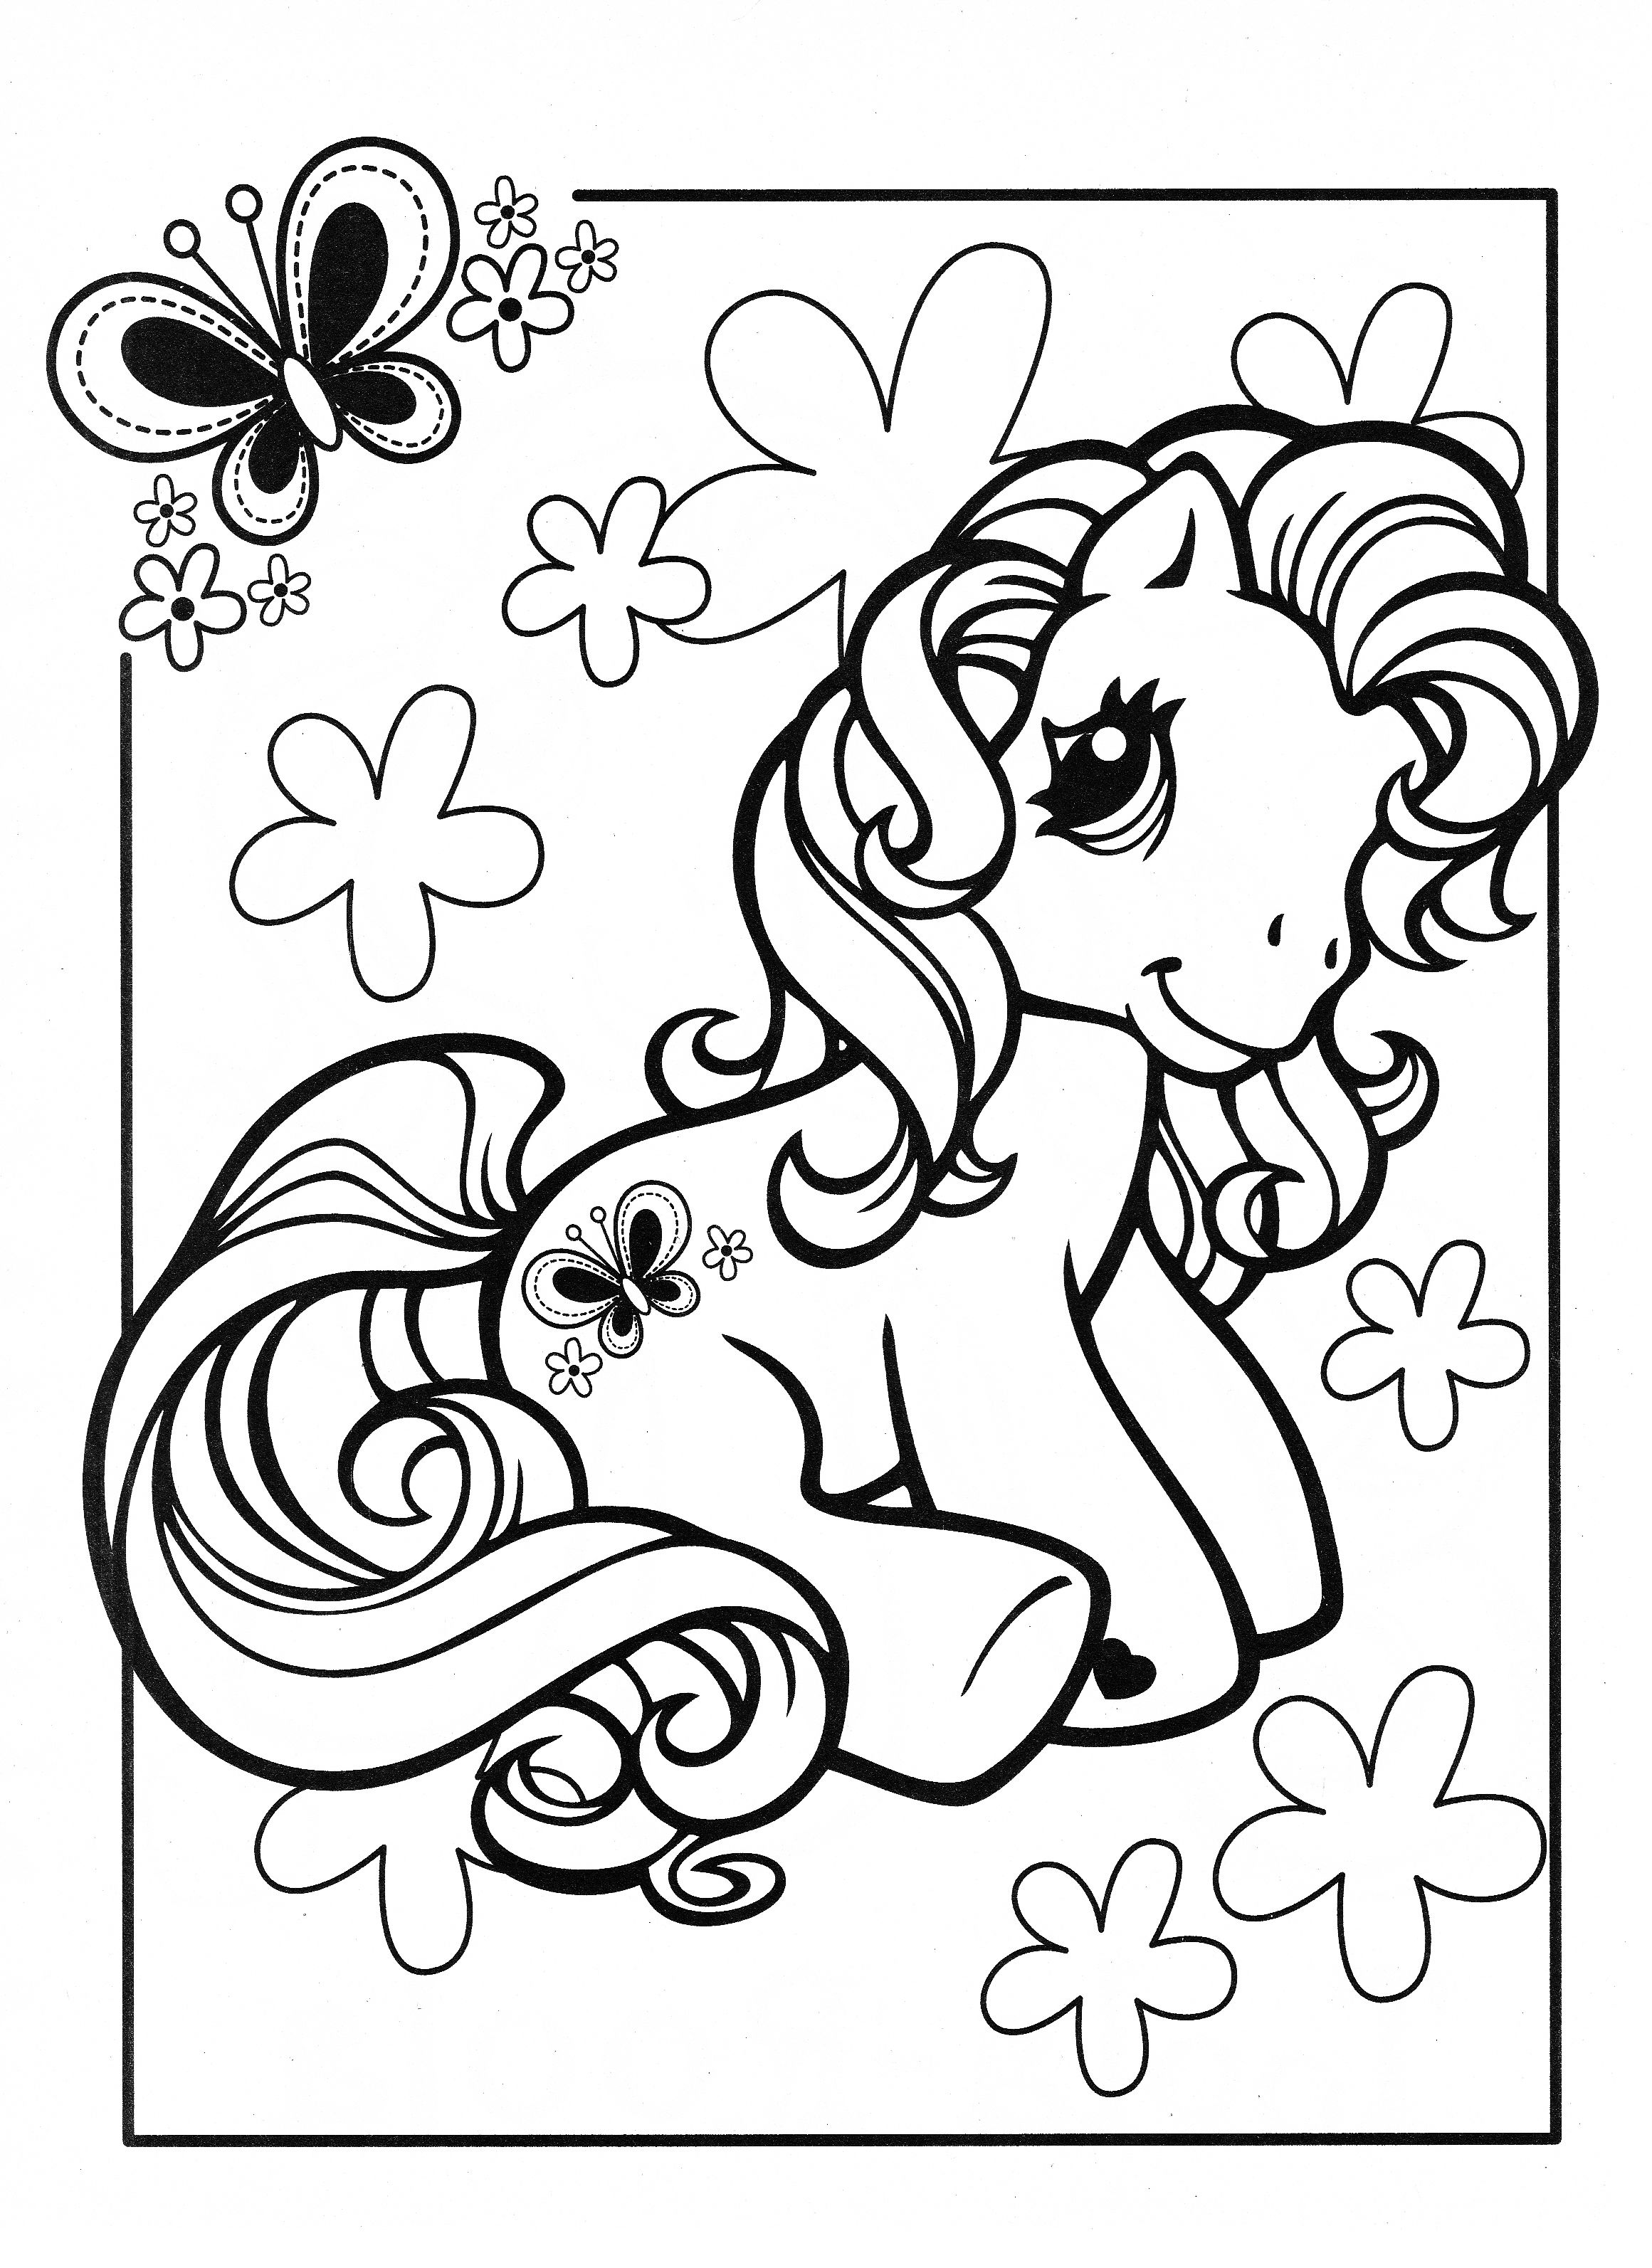 My Little Pony Coloring Page MLP - Scootaloo | Unicorn Coloring